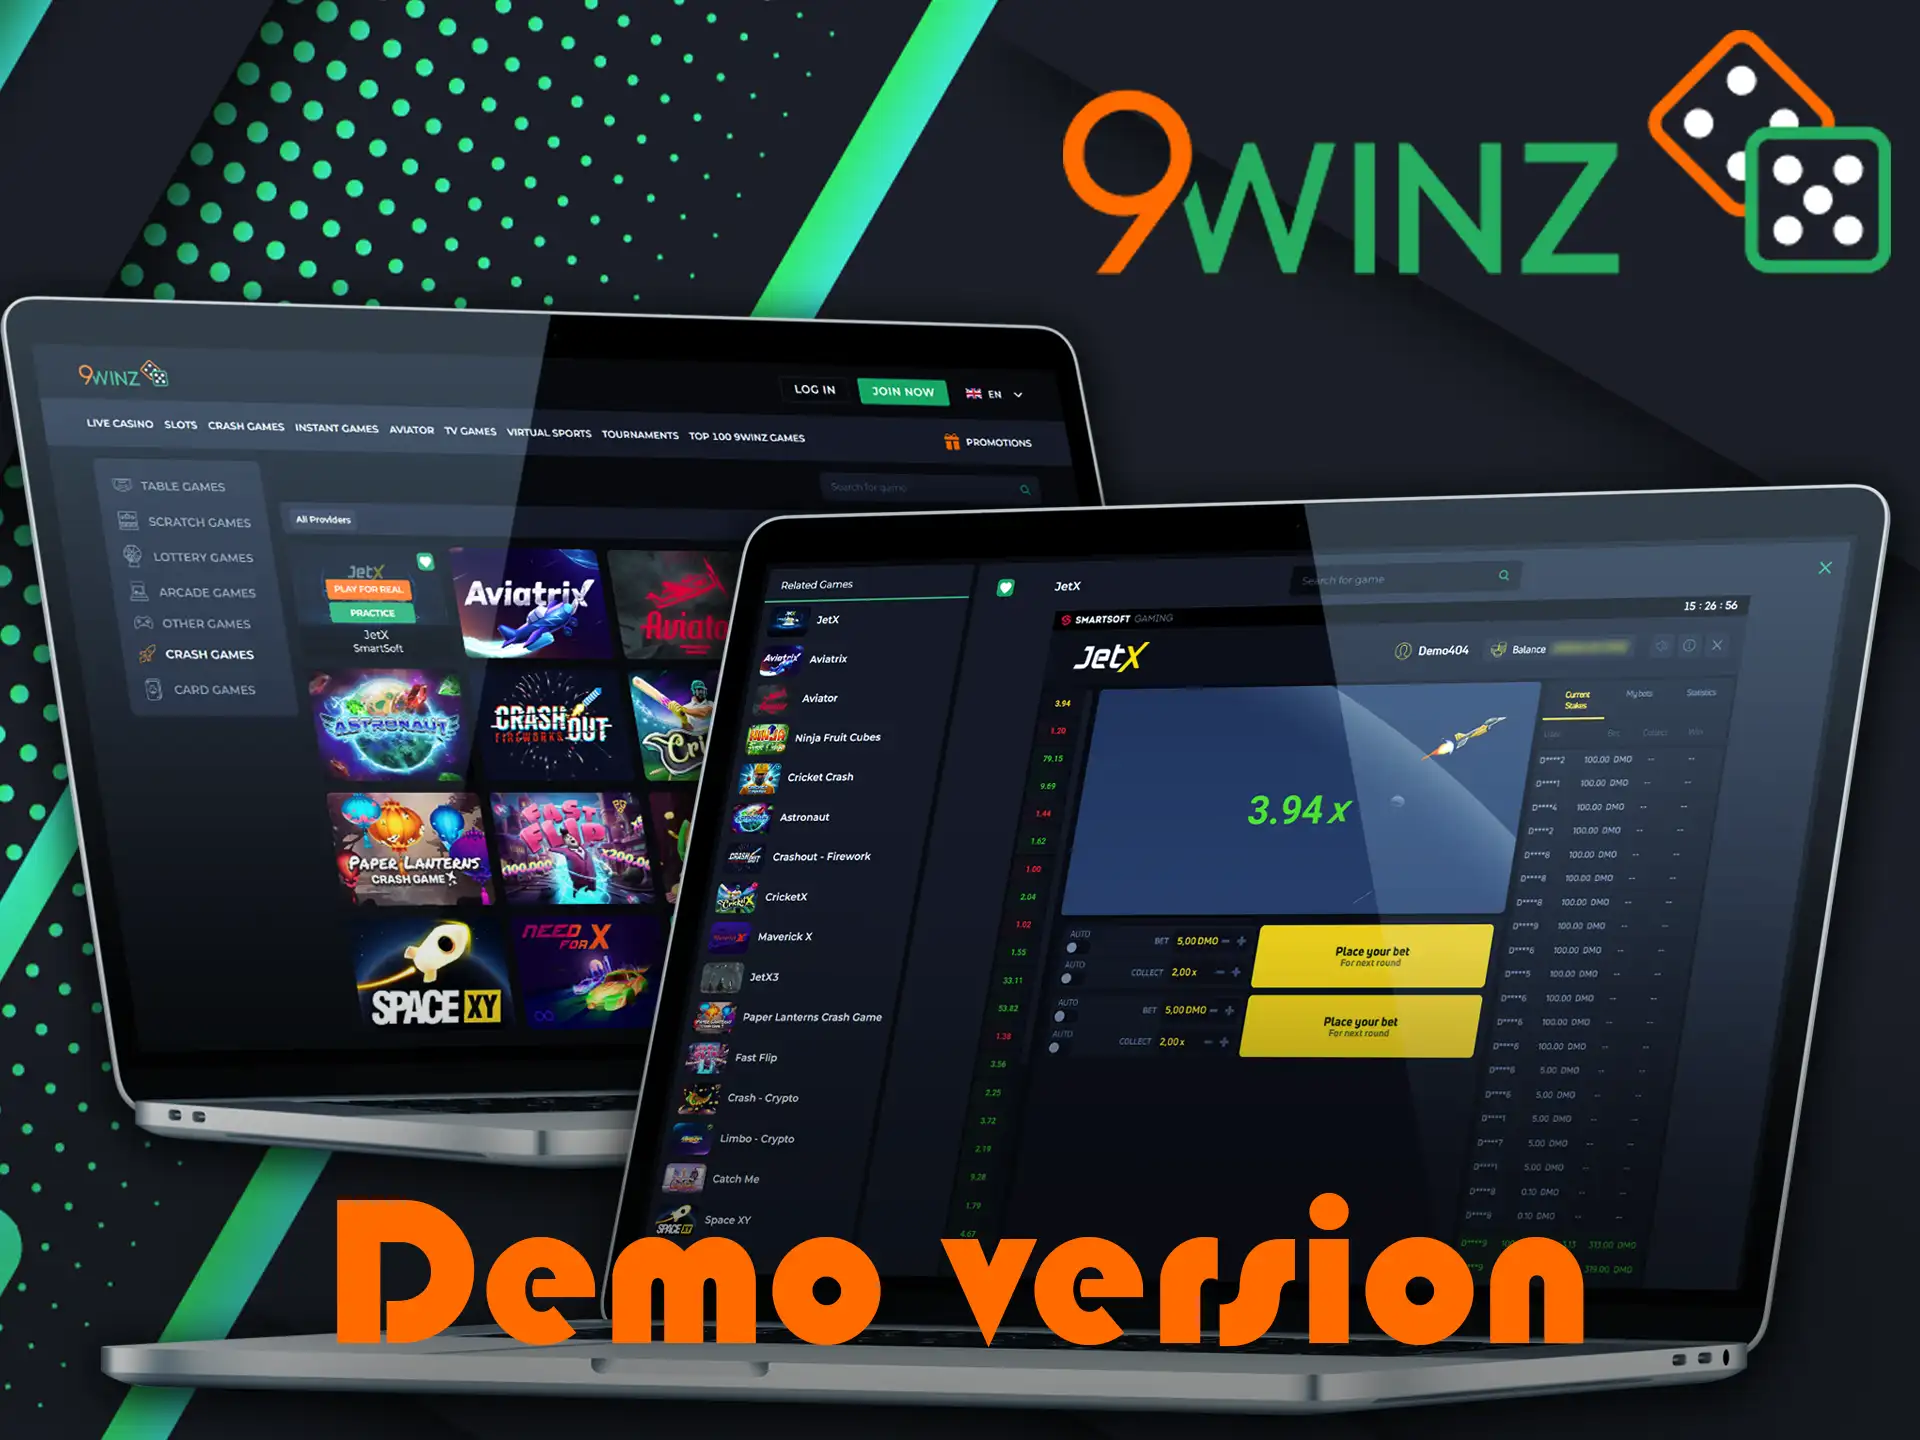 The demo version of 9Winz JetX gives players the opportunity to play for virtual money and test new strategies.